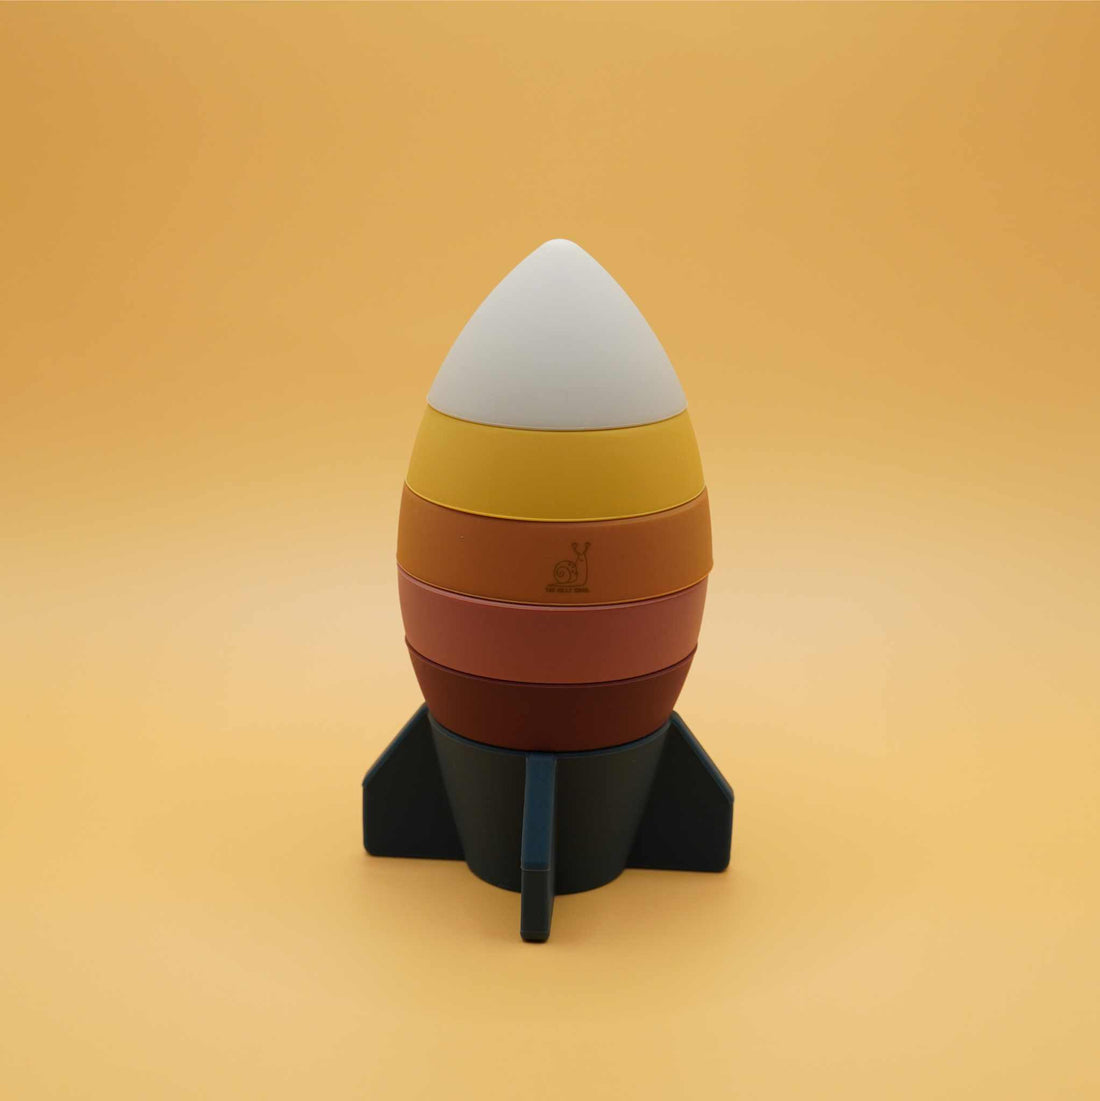 stacked together rugged rocket silicone stacking toy